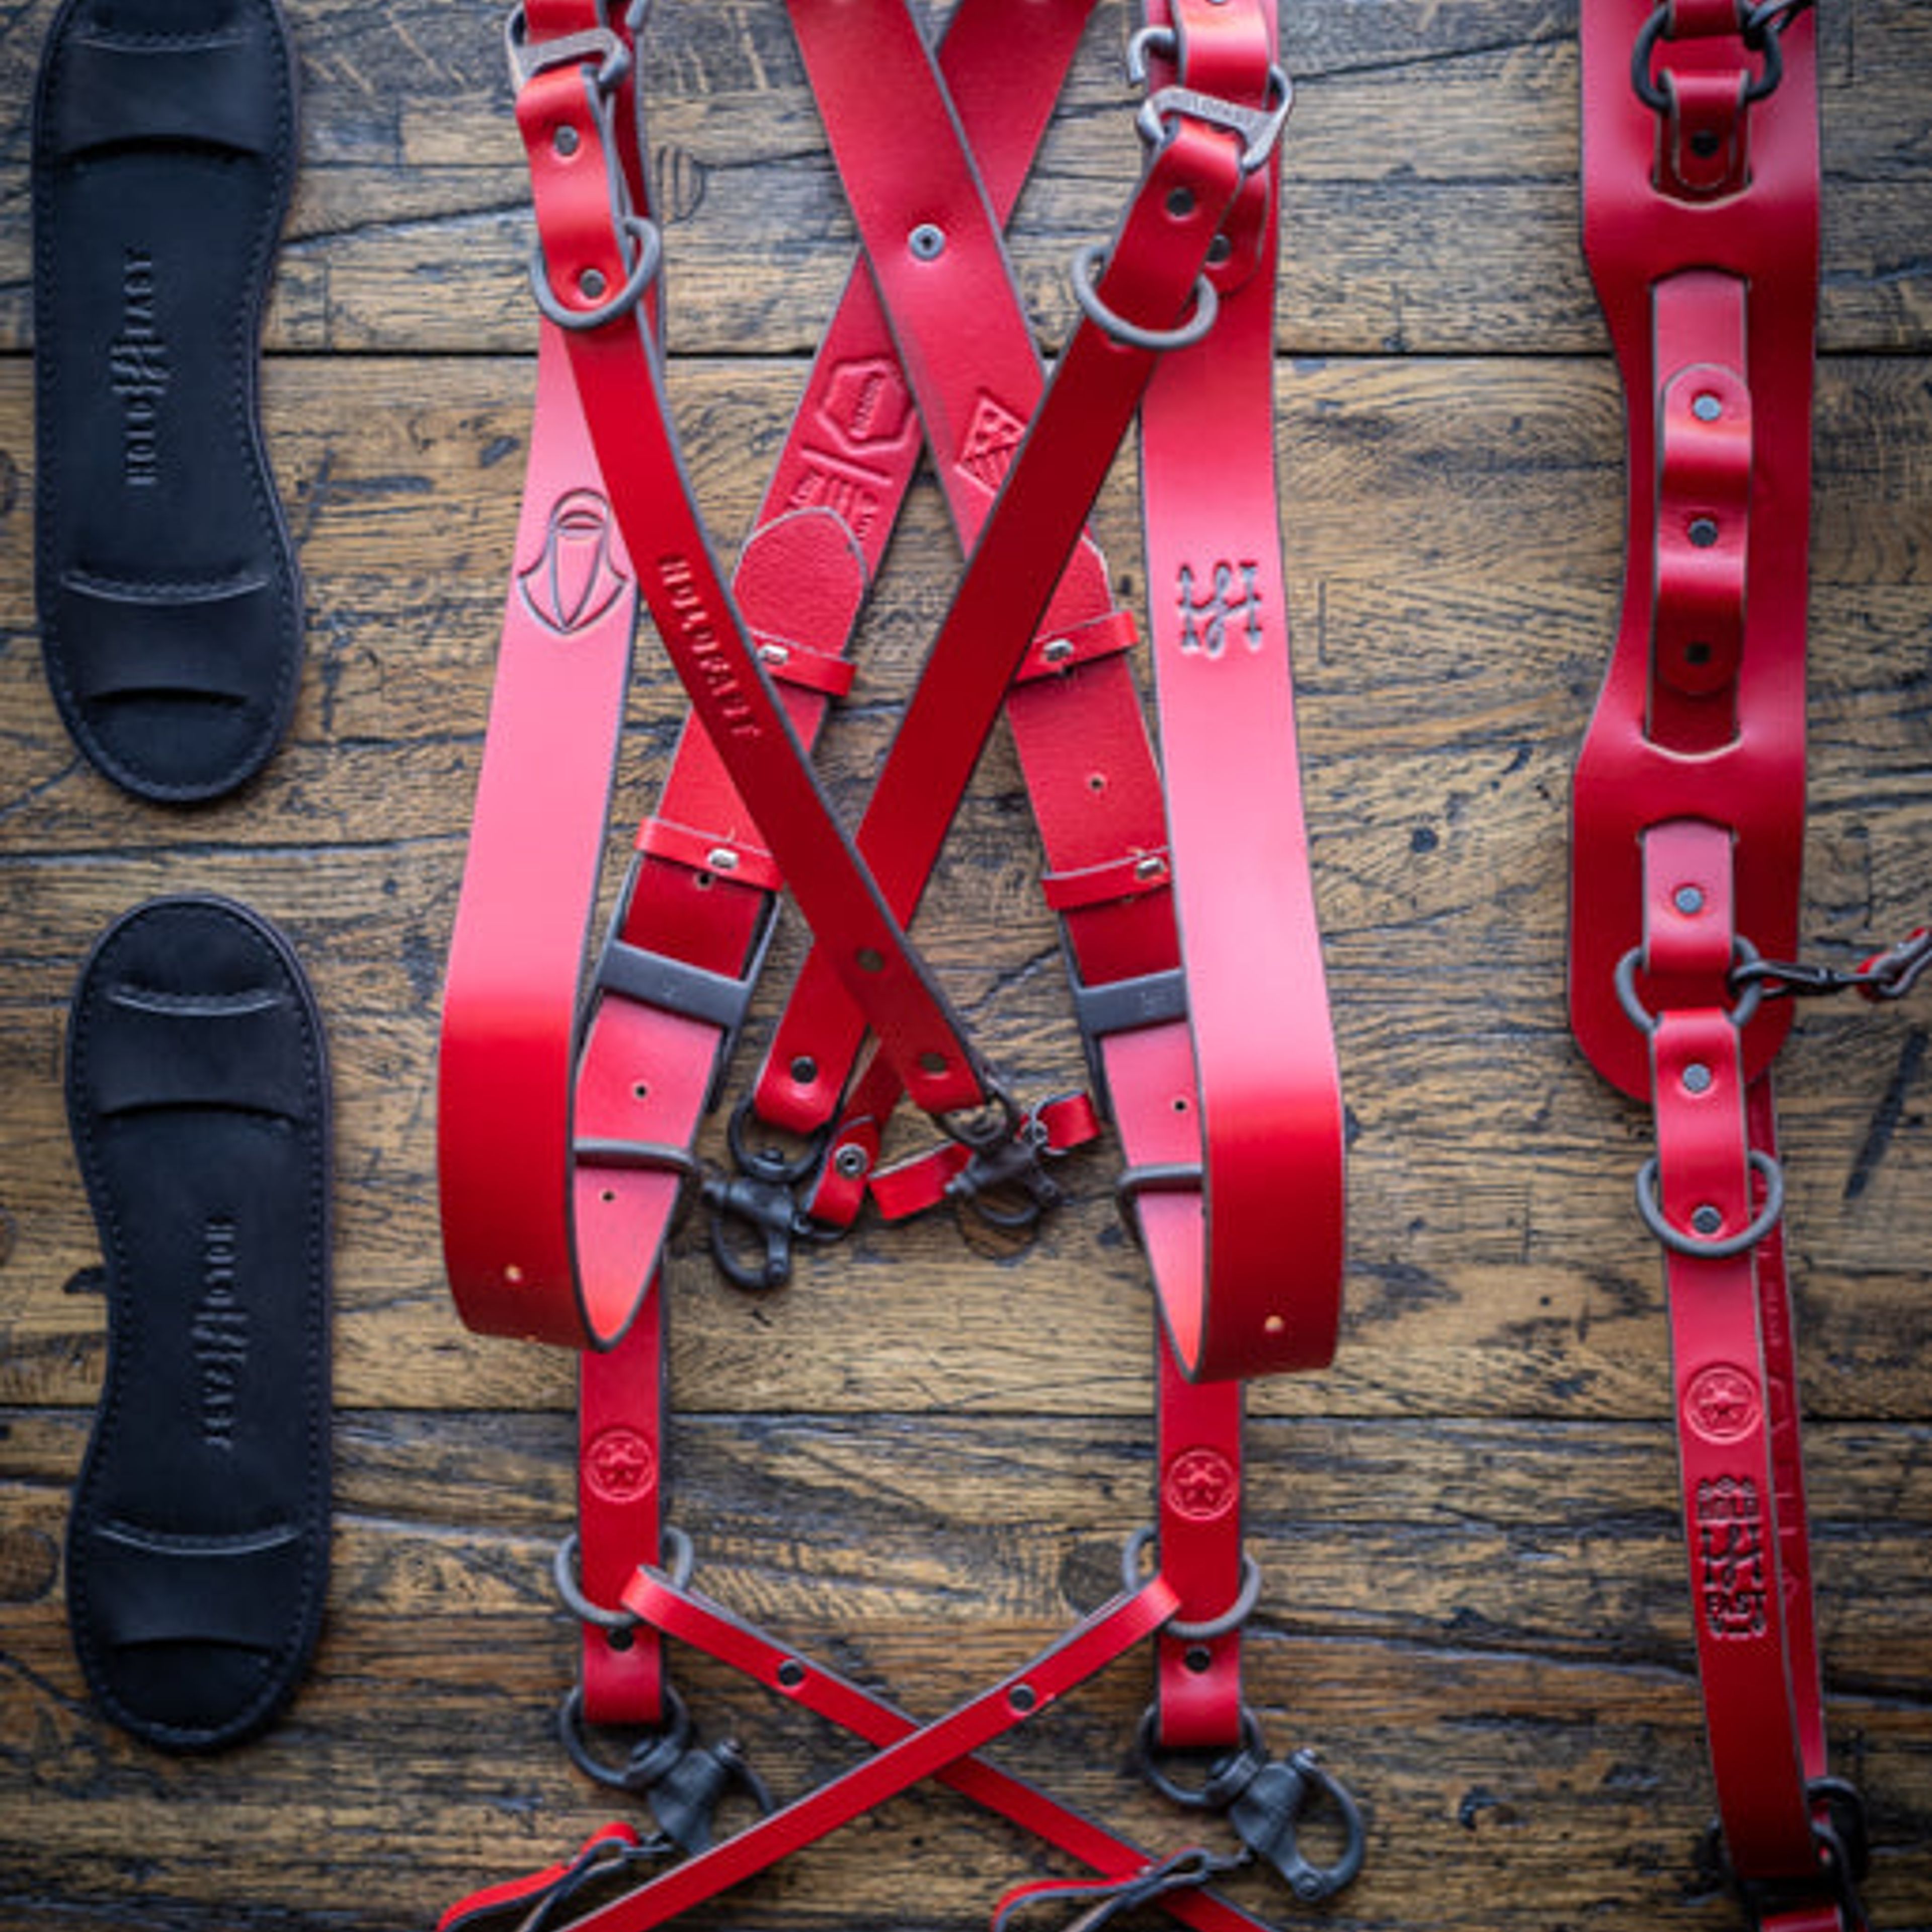 The Imperial Guard (Limited Edition Straps)